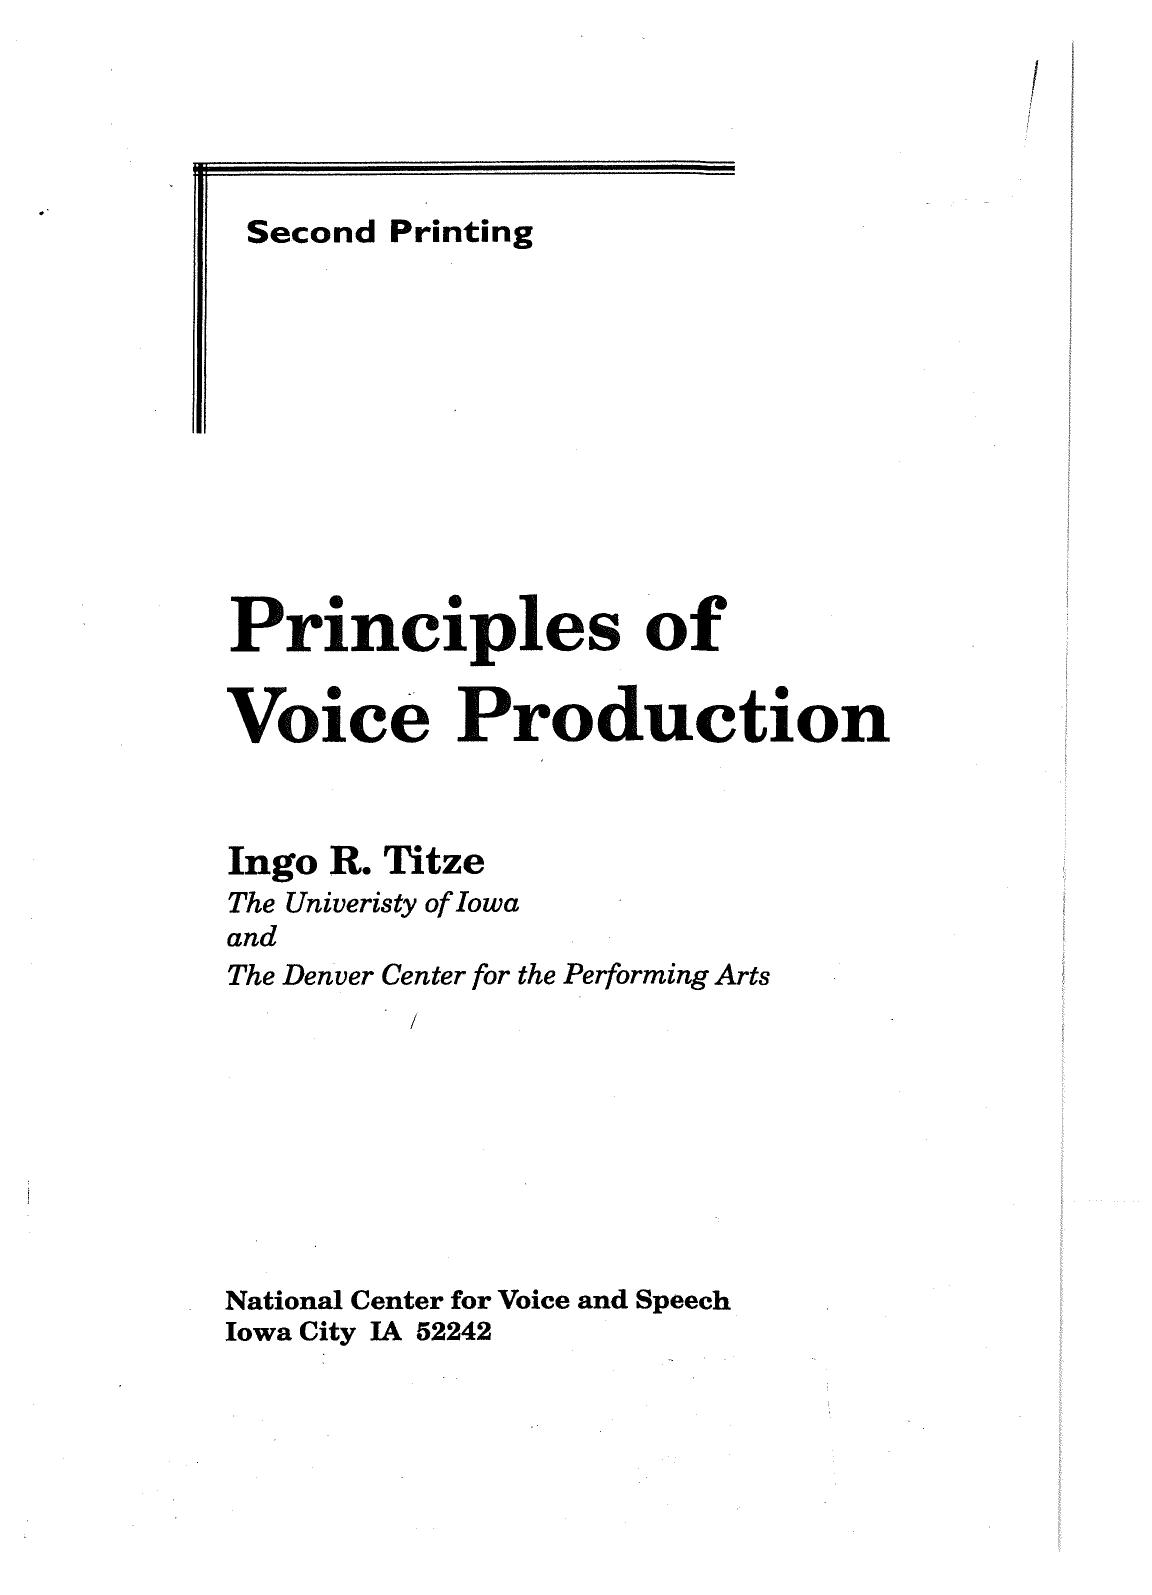 Principles of voice production